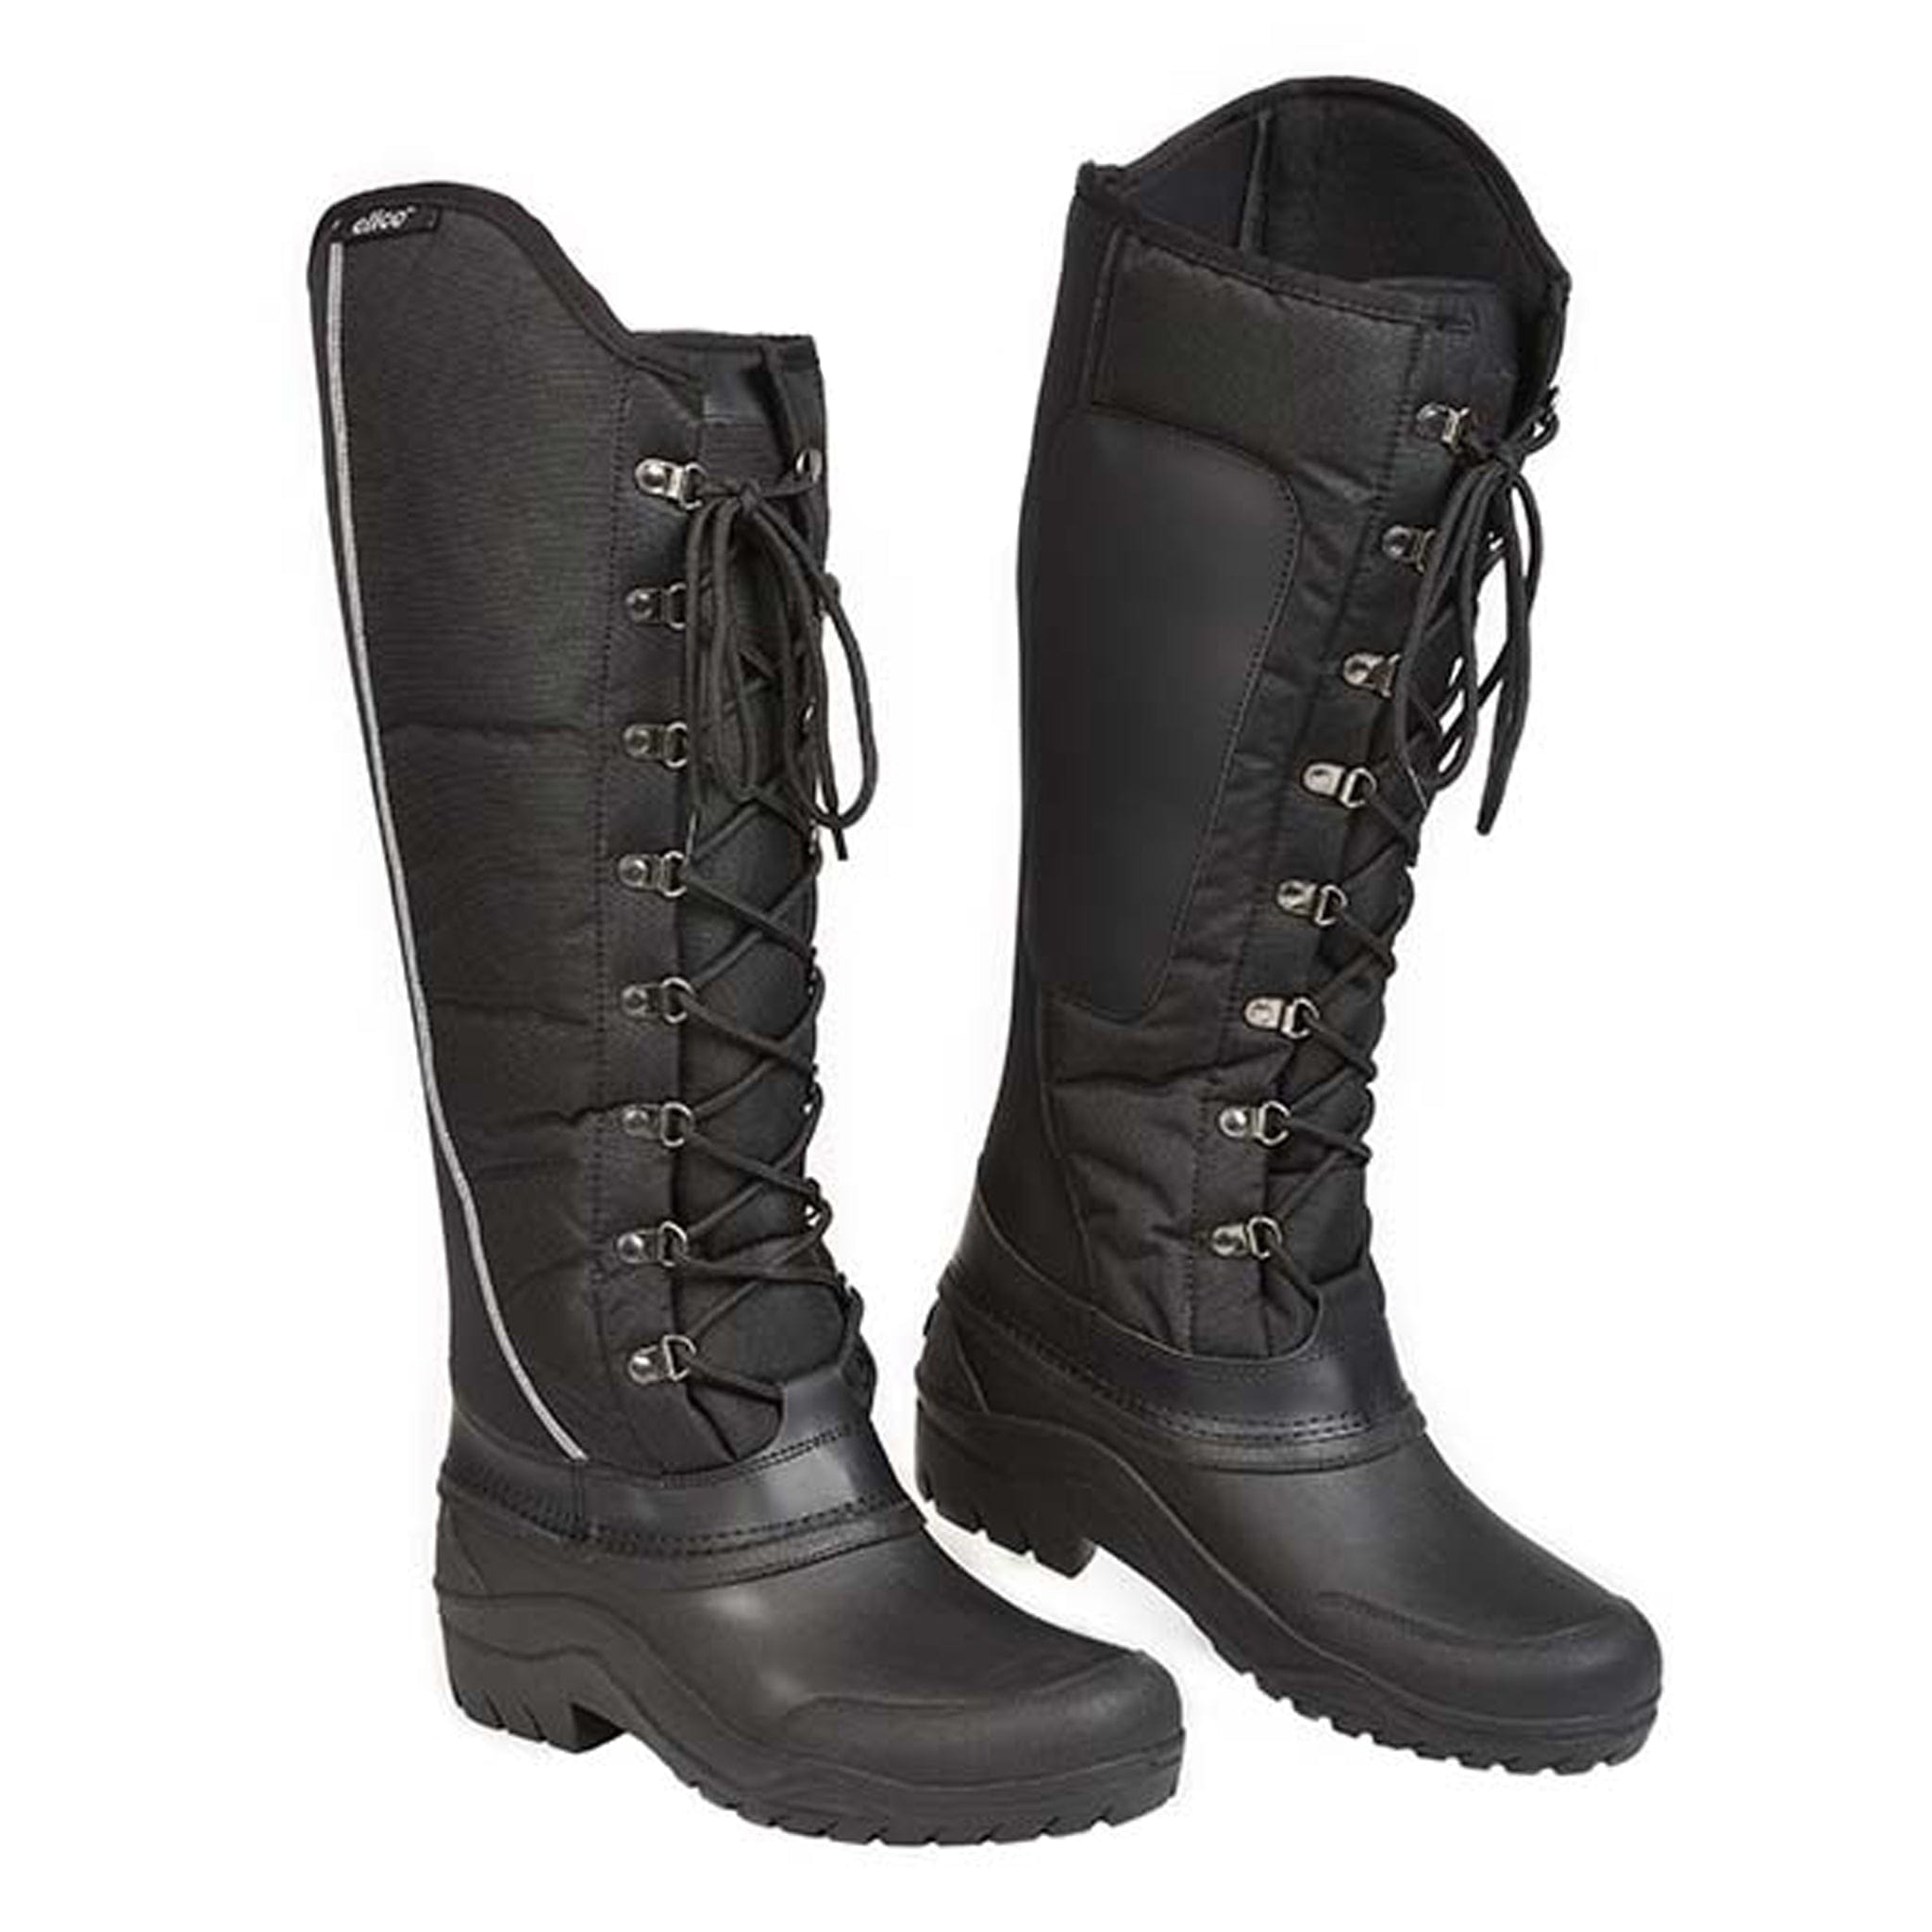 Elico Yeadon Winter Boots Black Front